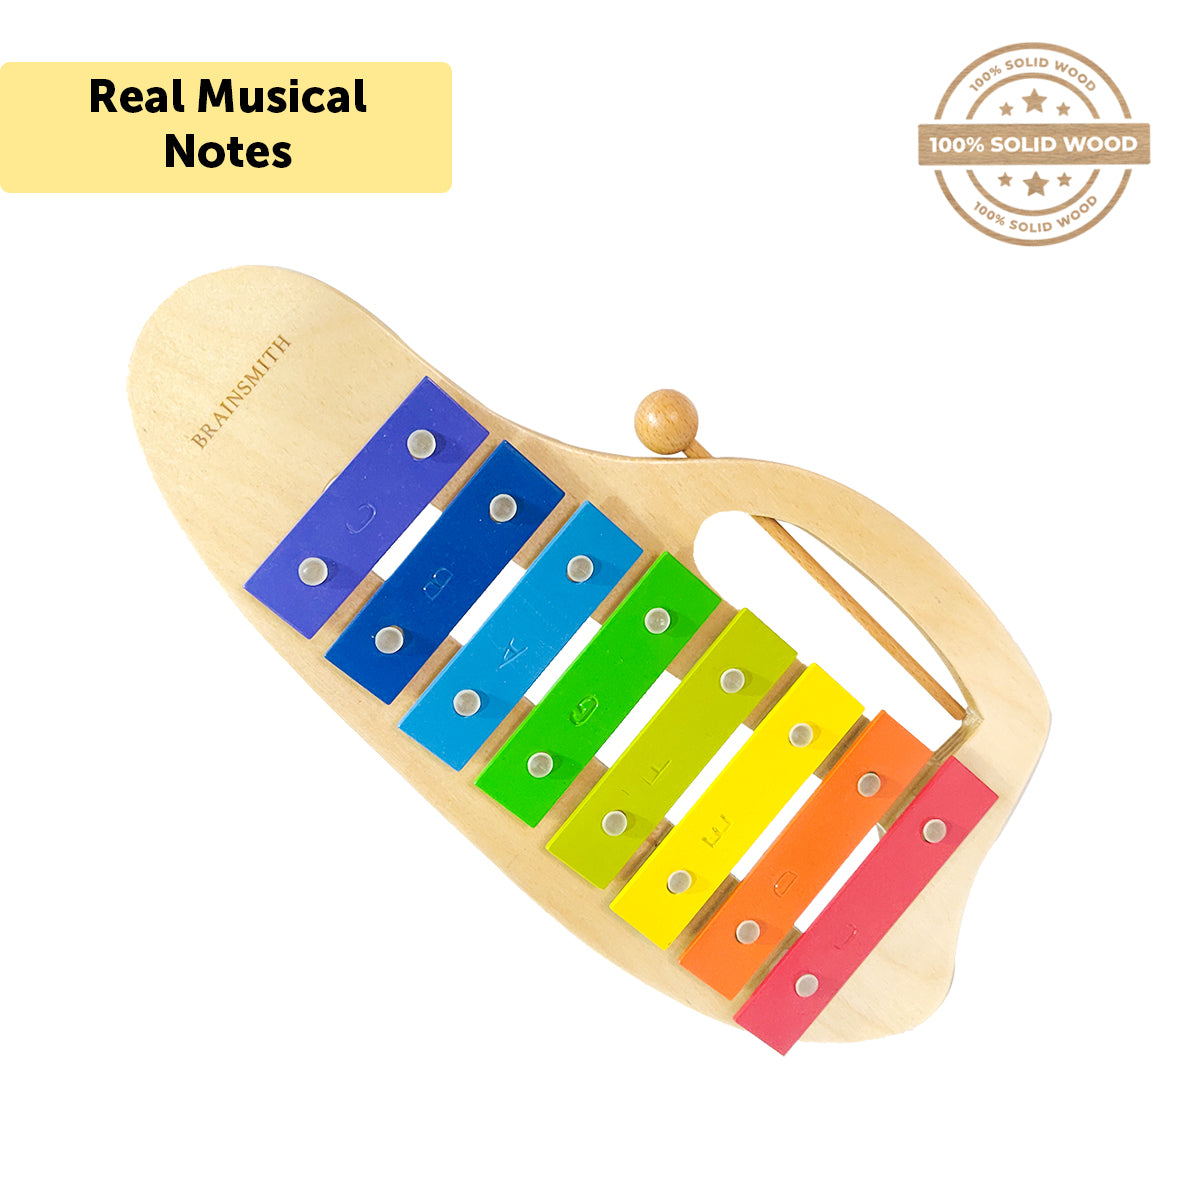 wooden musical xylophone real notes